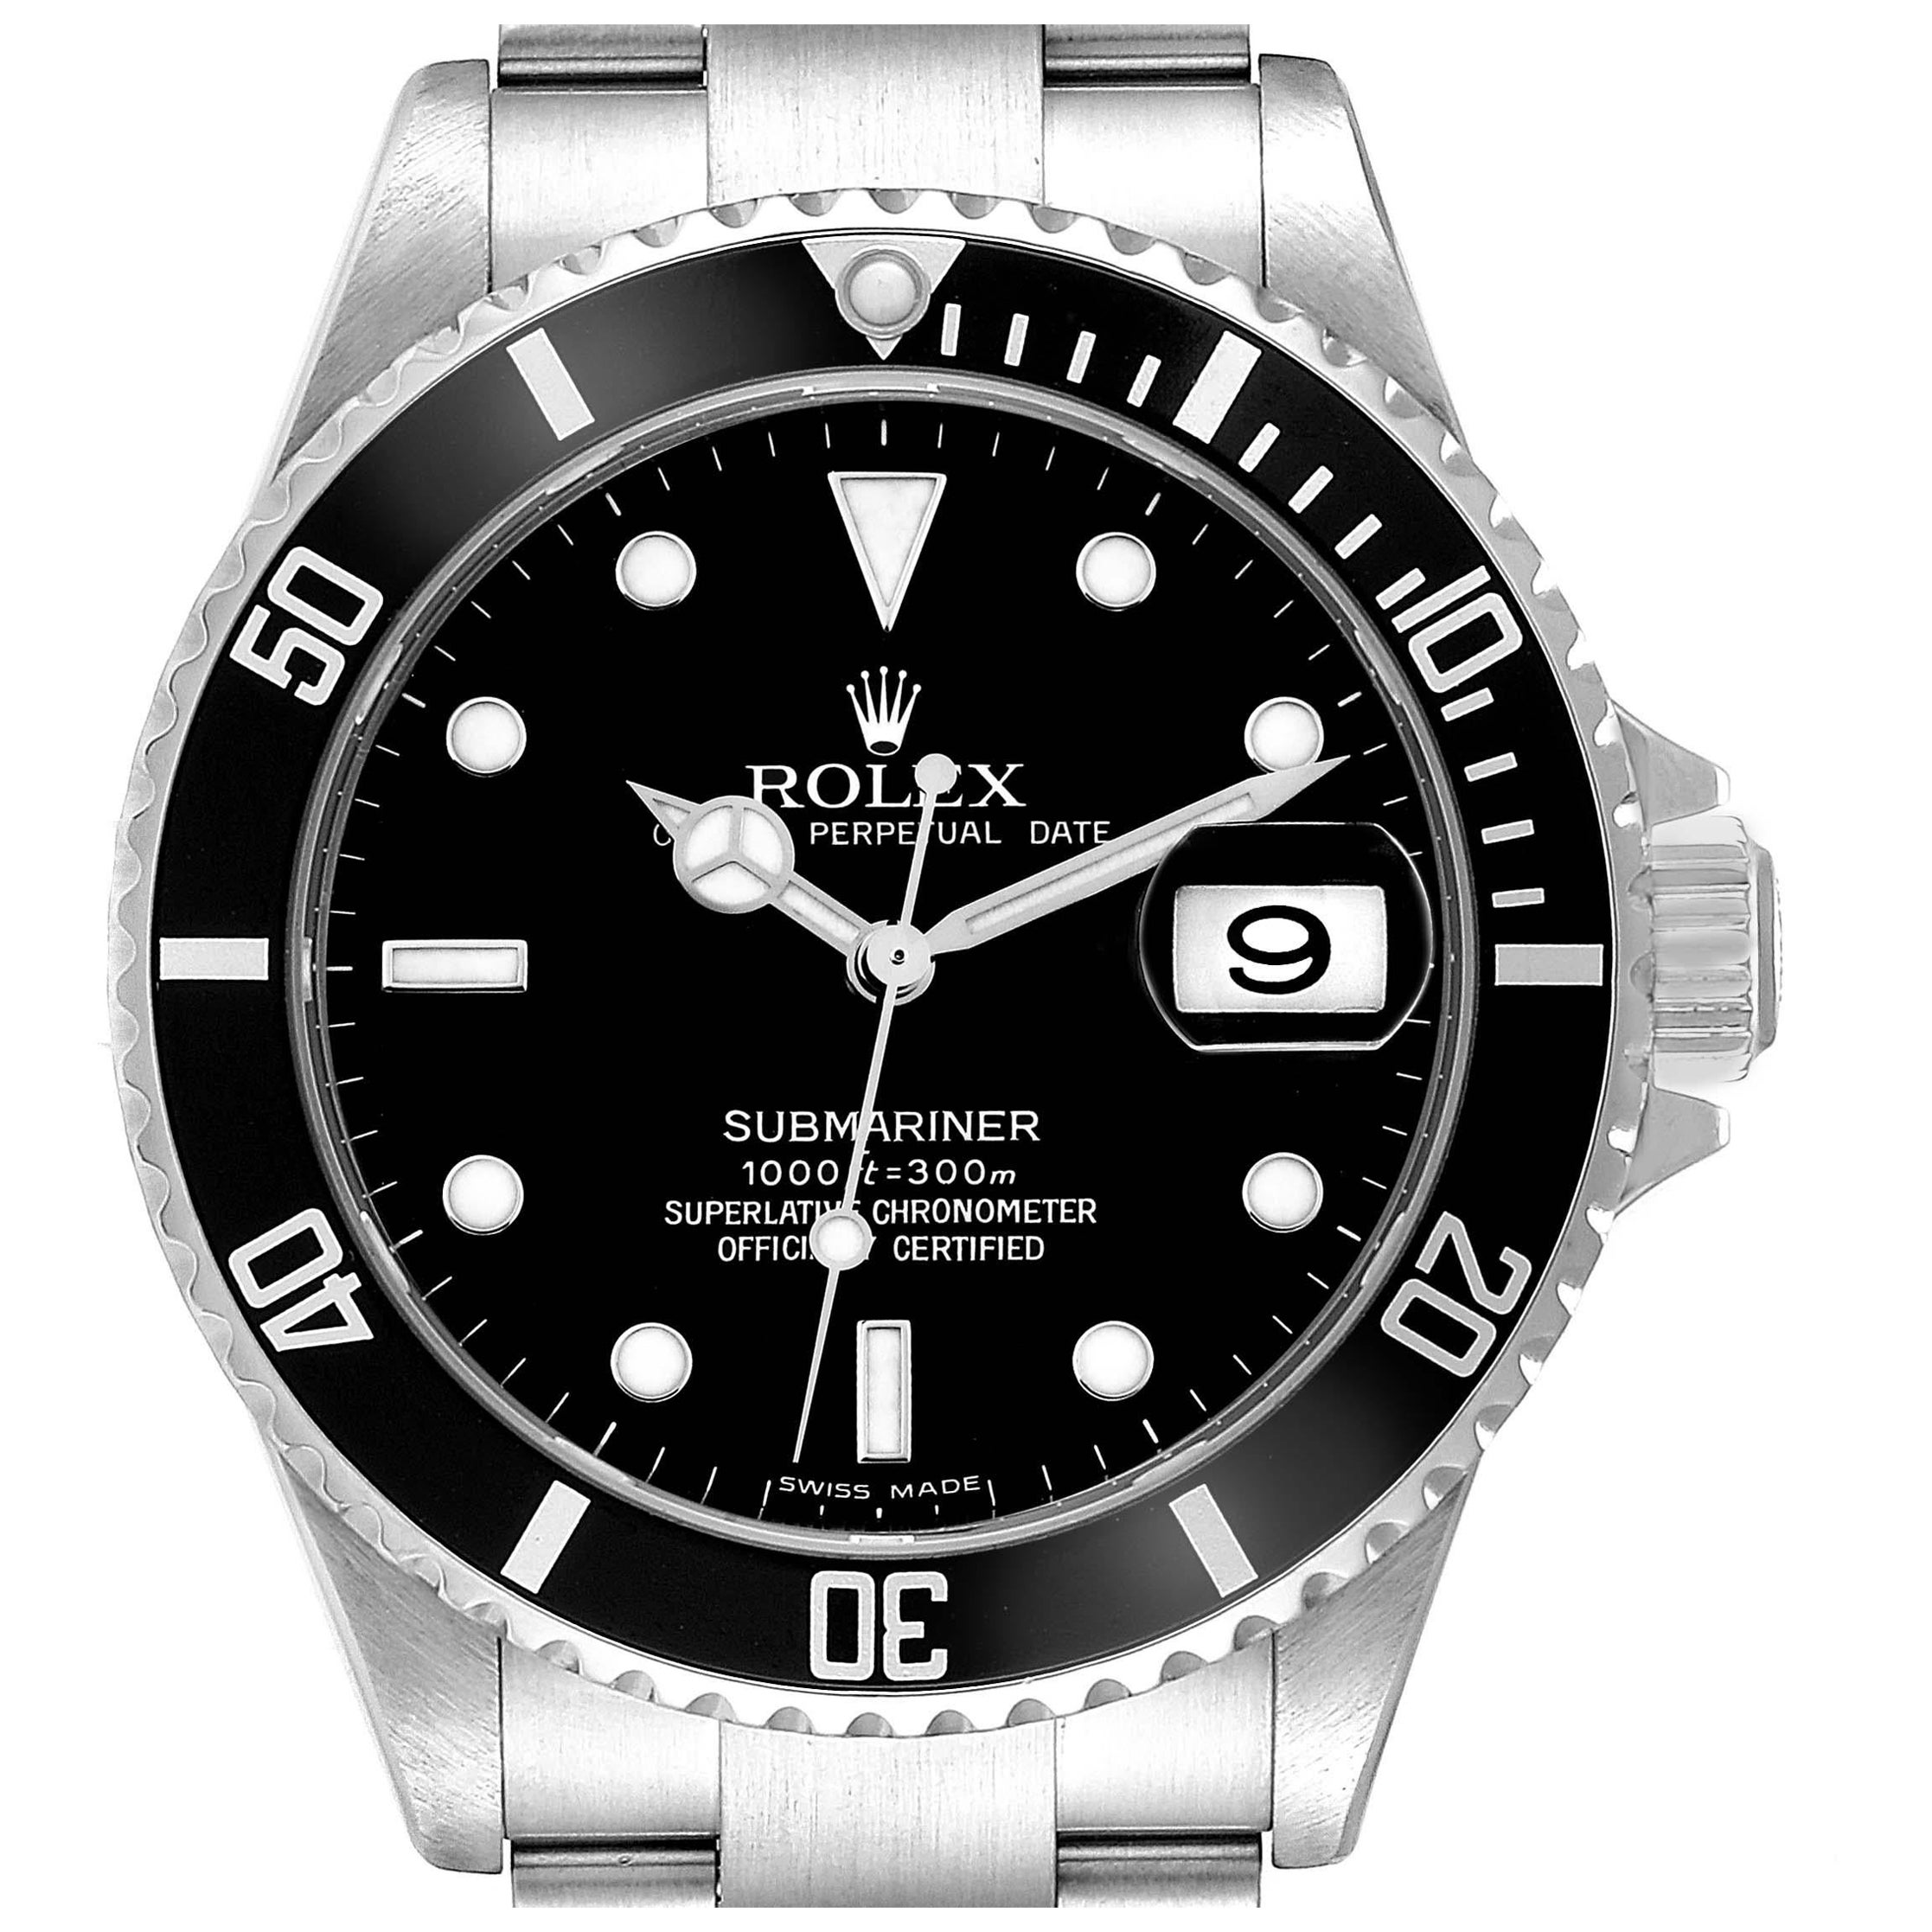 Rolex Submariner Date Black Dial Steel Mens Watch 16610 Box Papers For Sale